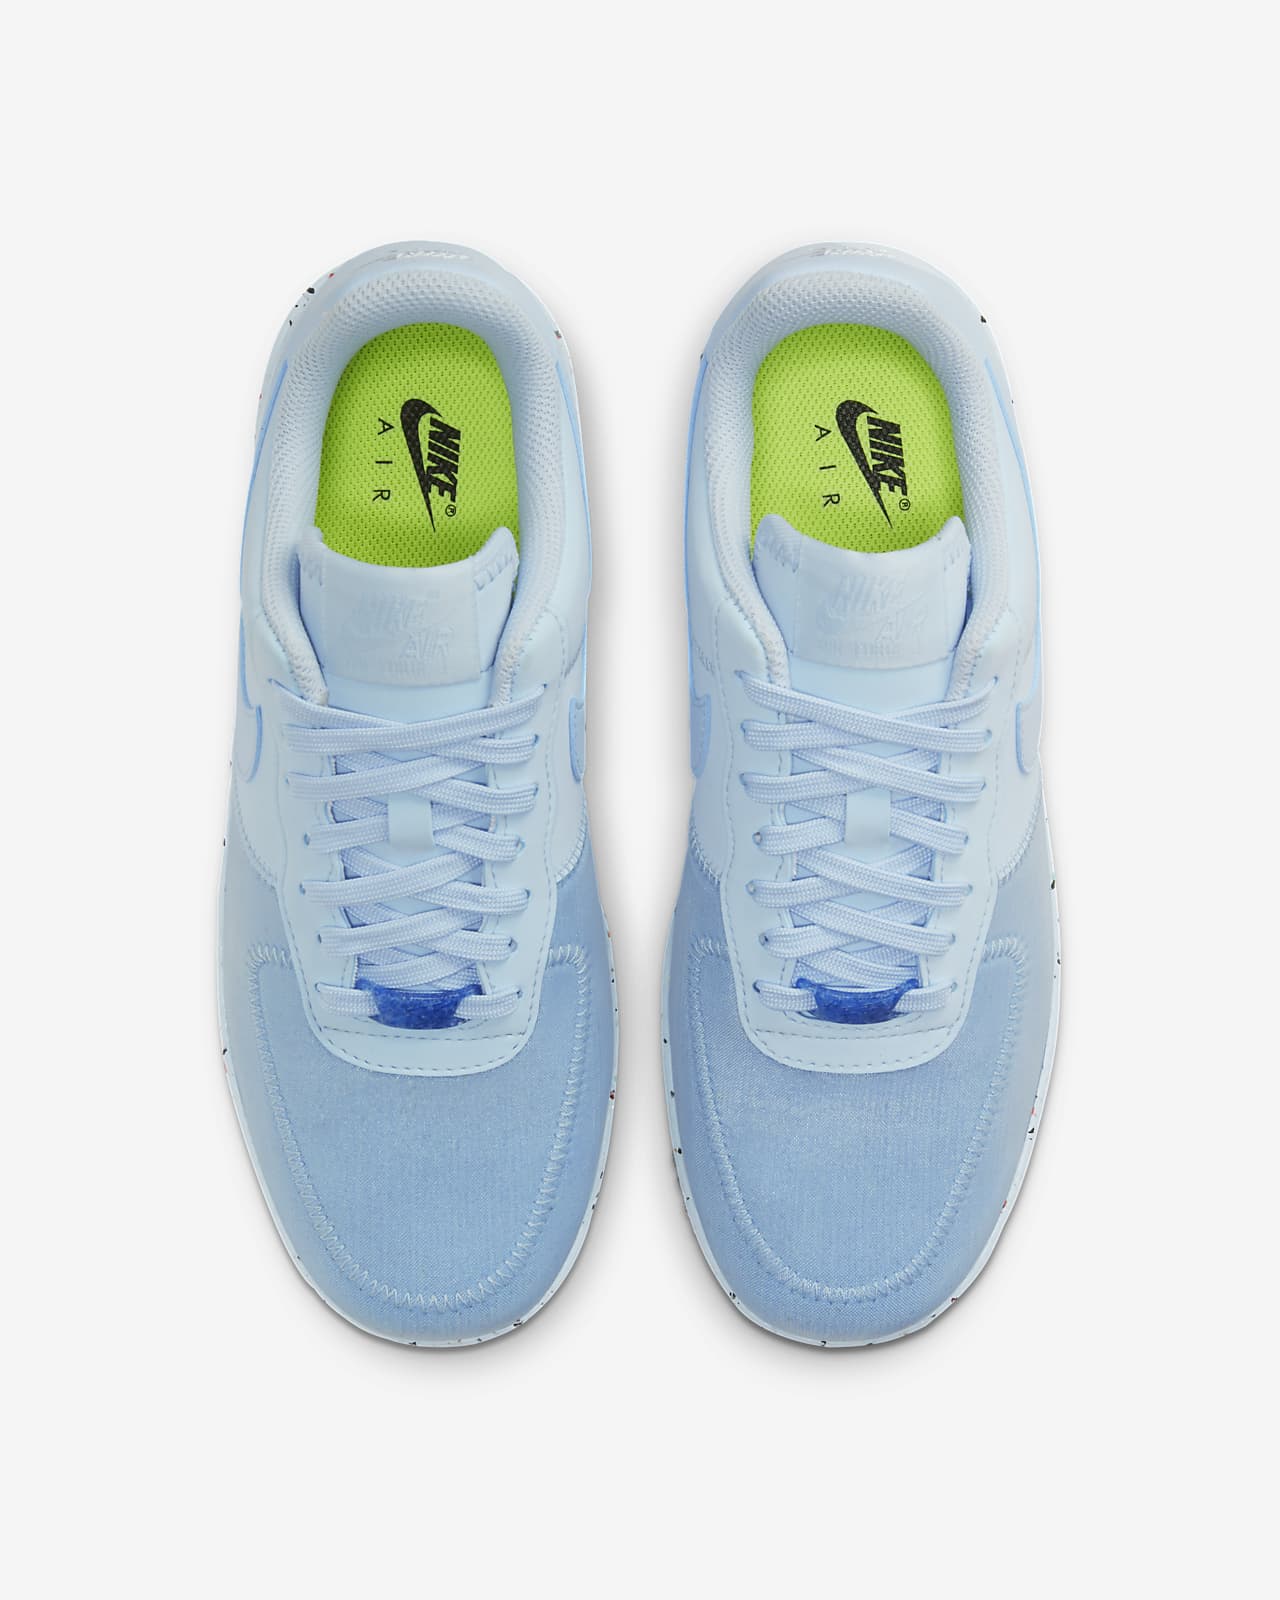 blue nike shoes air force 1